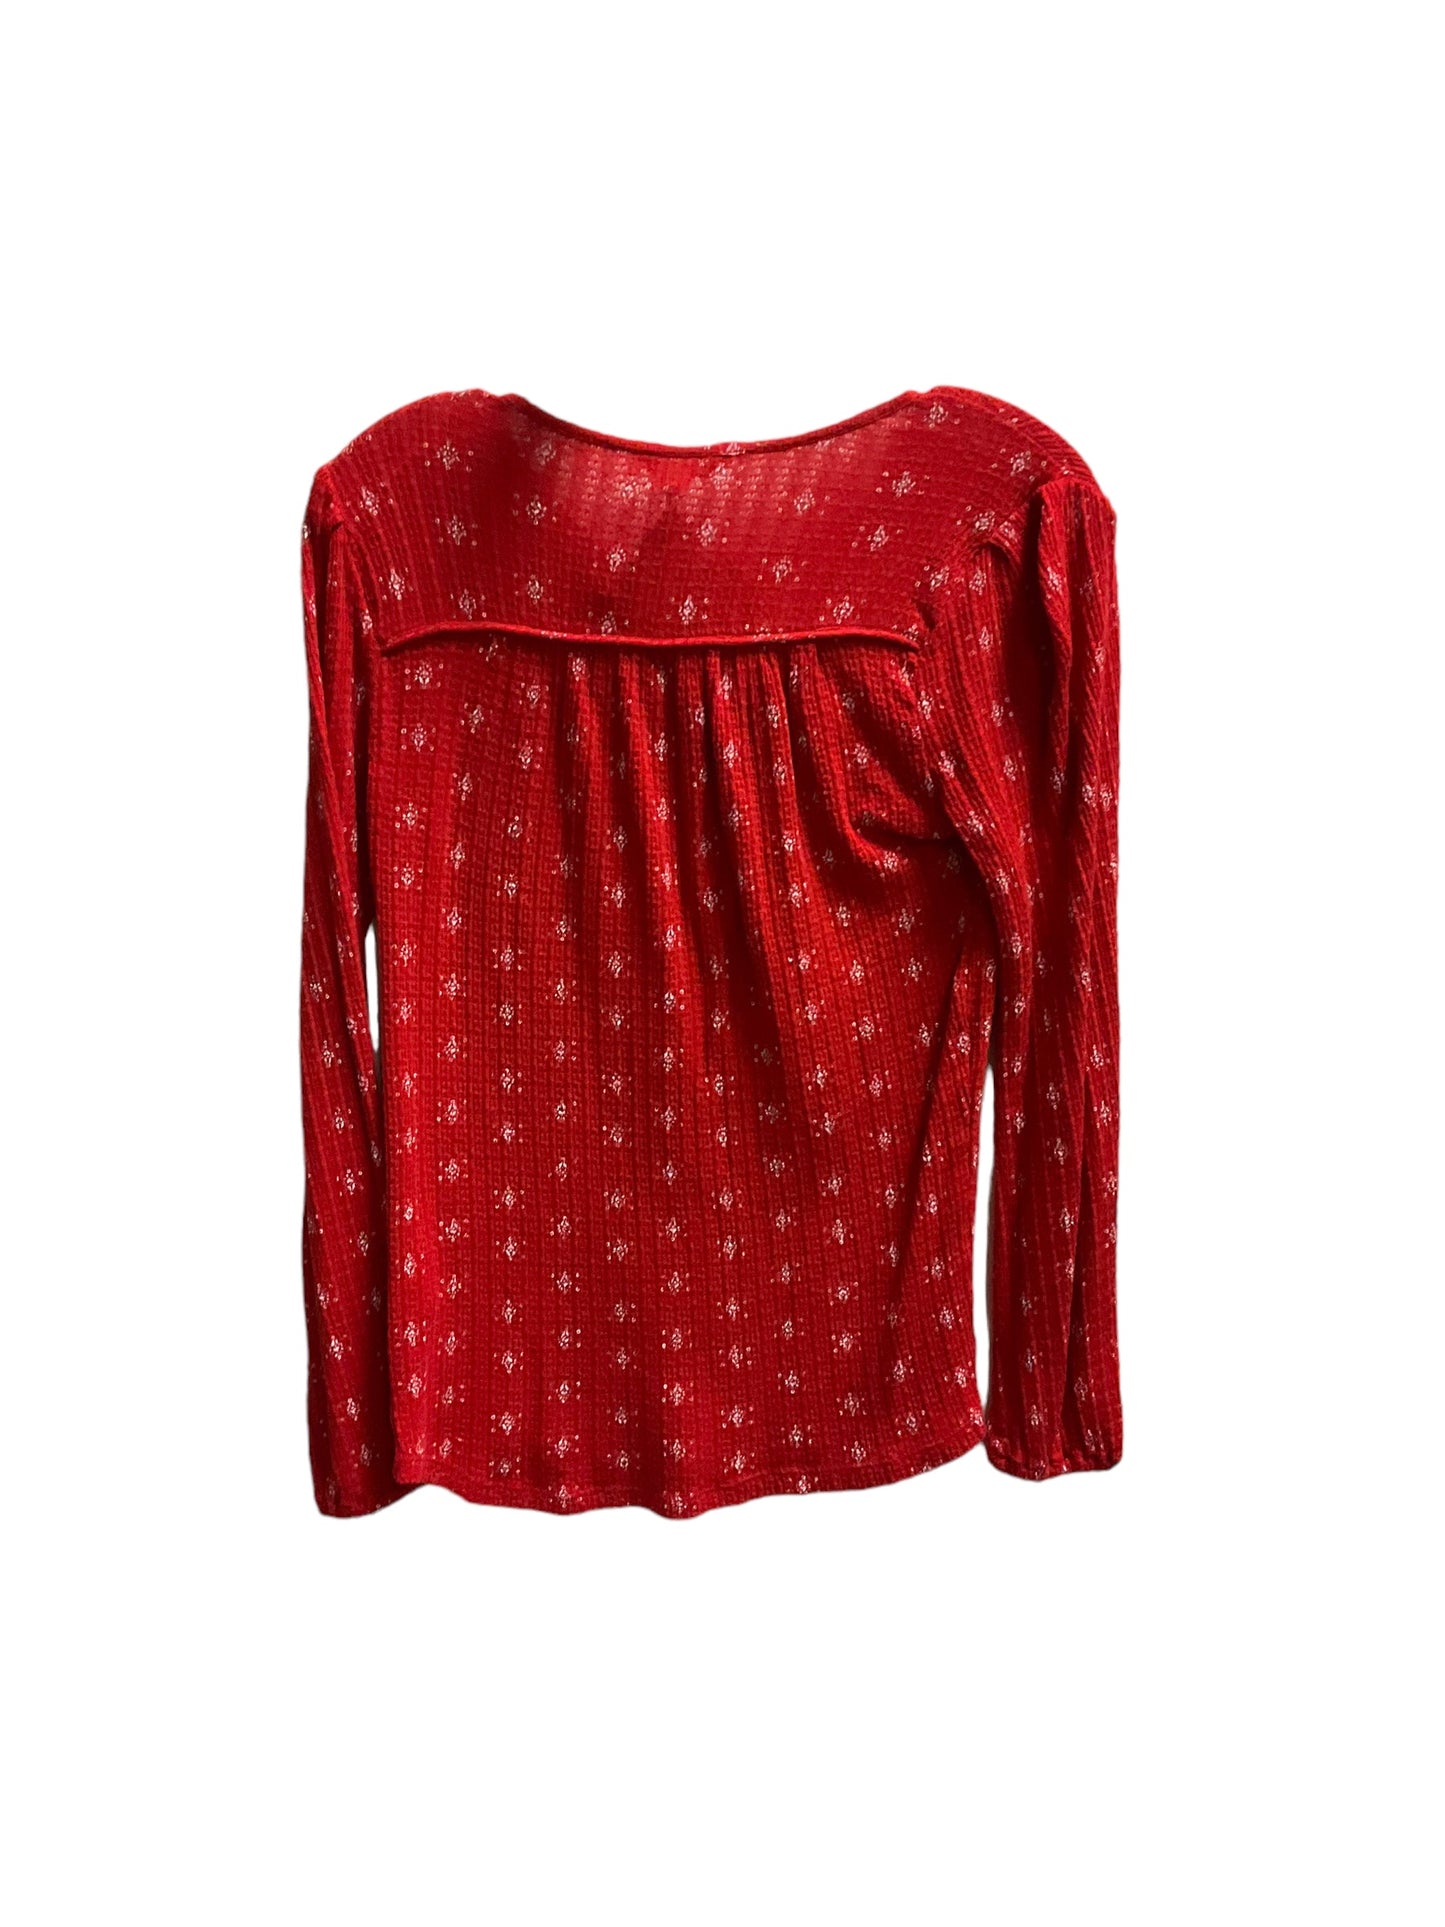 Red & White Top Long Sleeve Lucky Brand, Size Xs